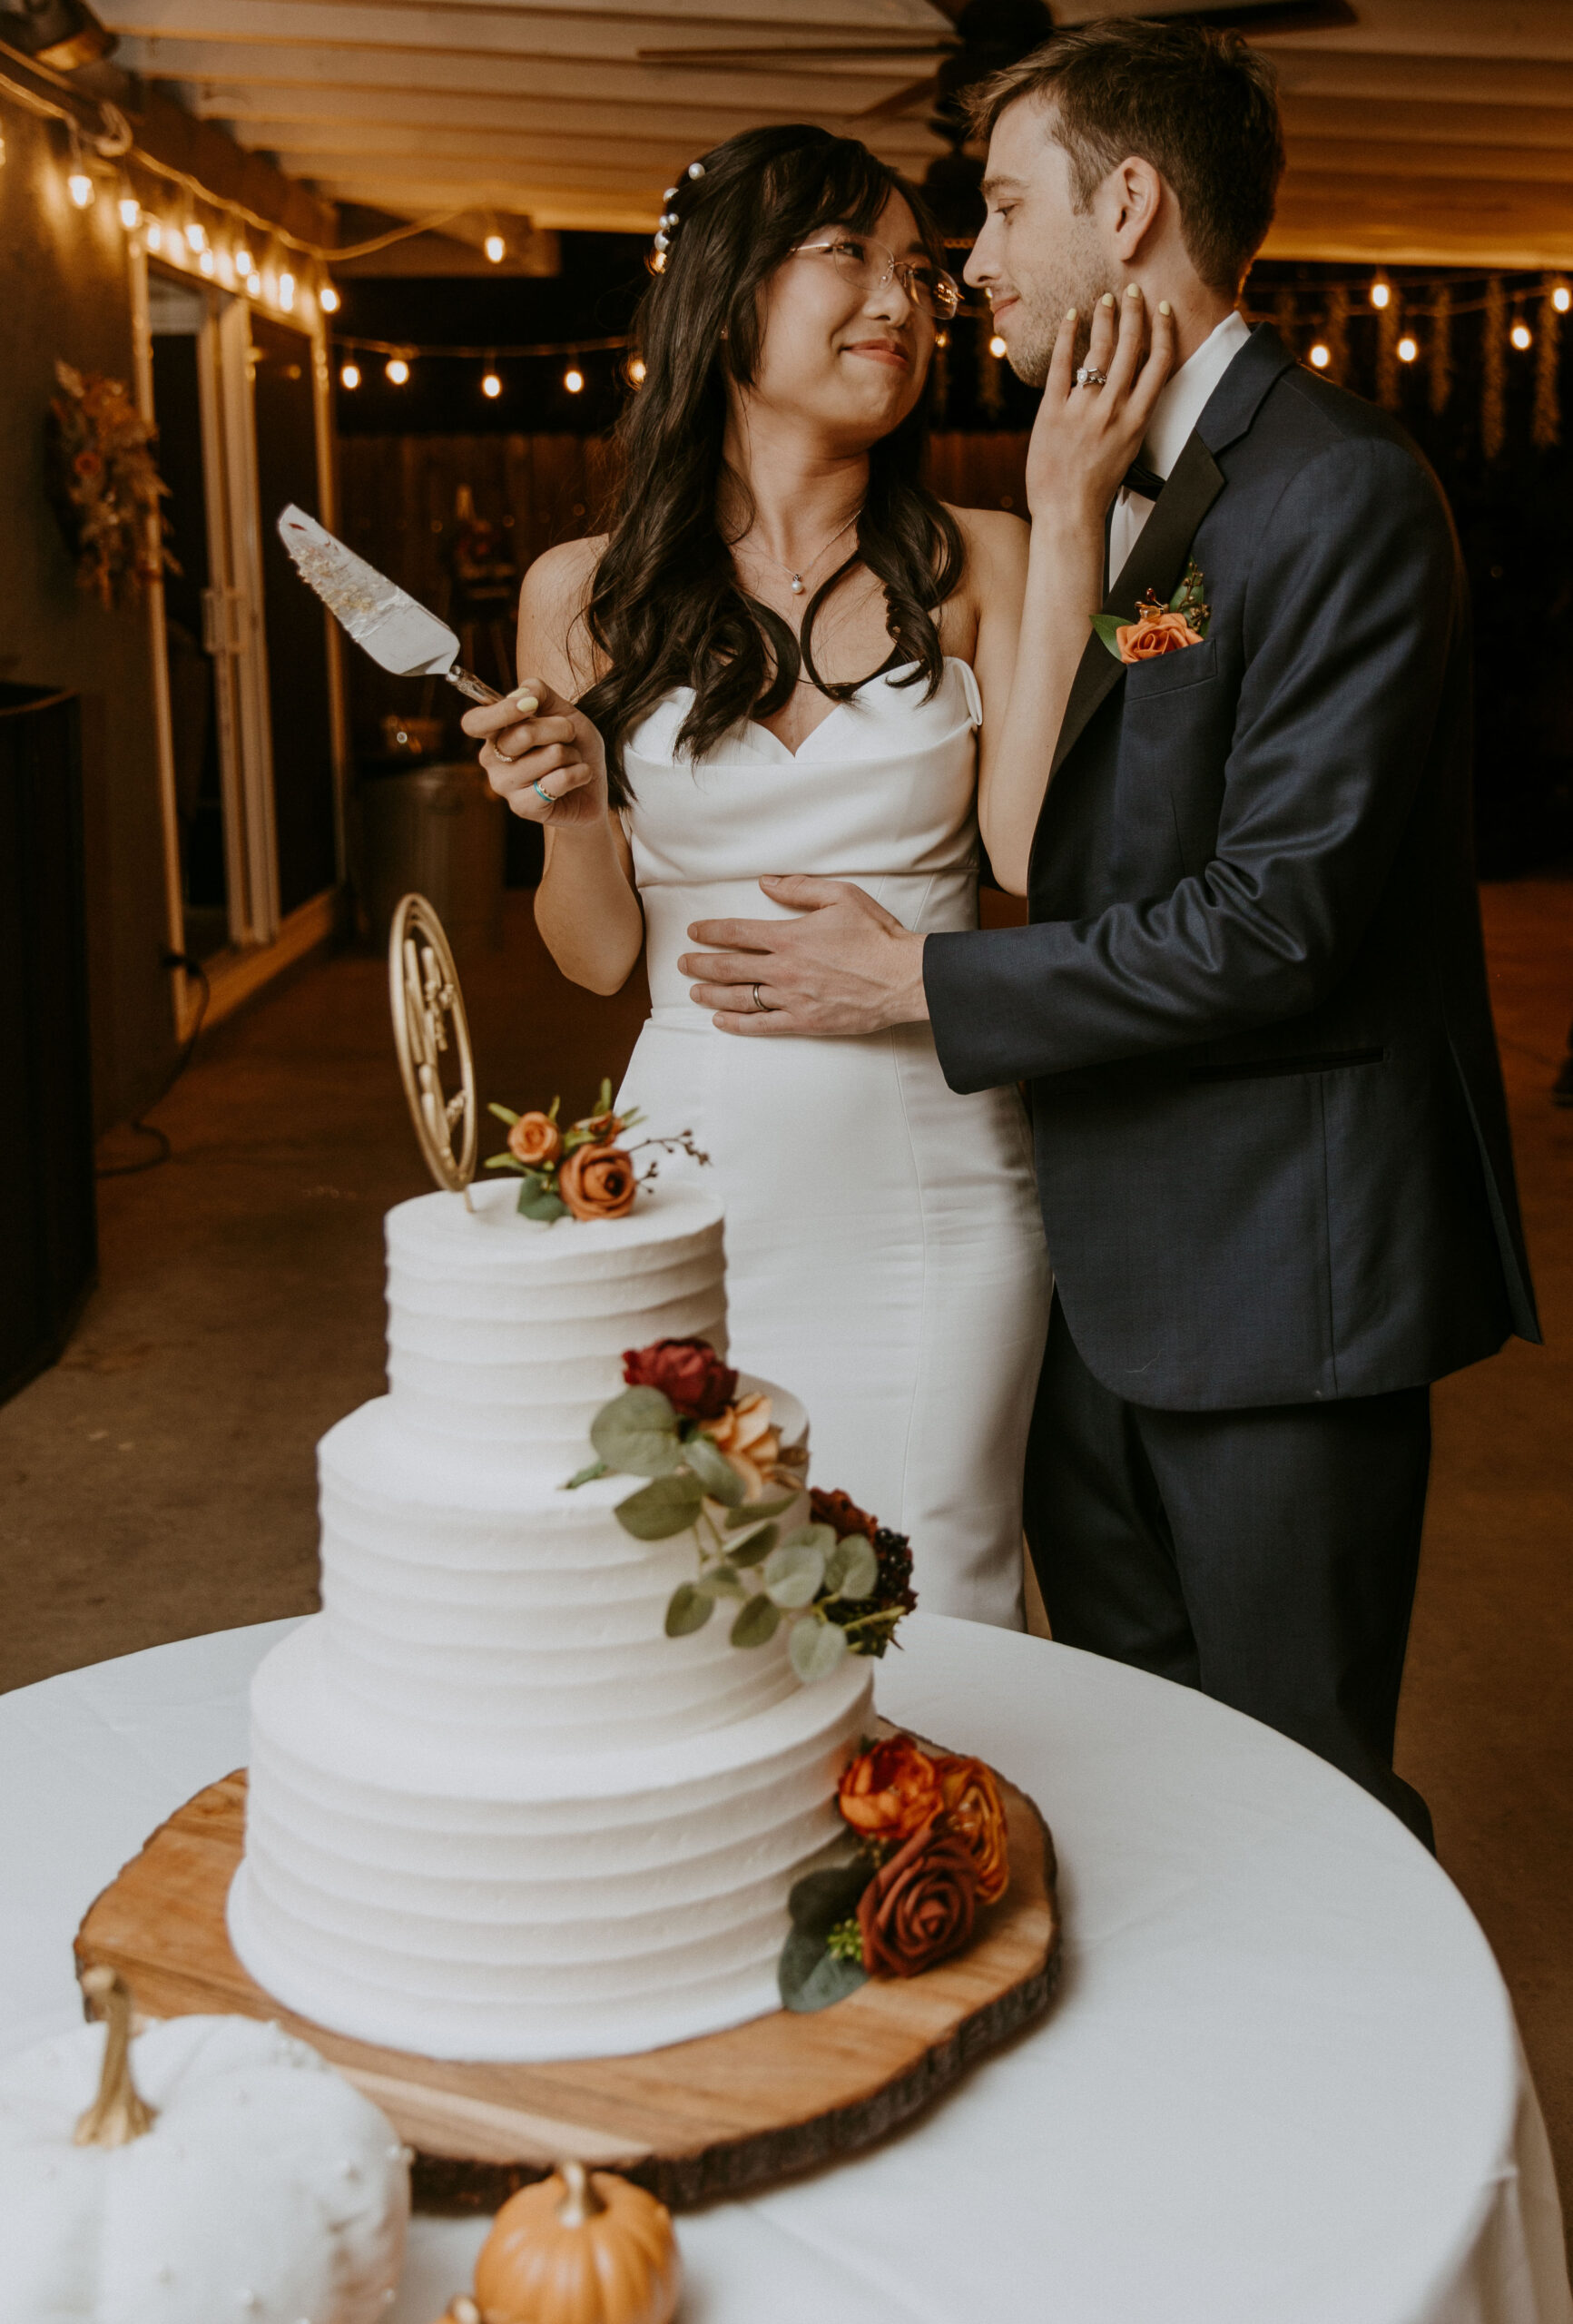 A couple in wedding attire preparing to cut a multi-tiered cake decorated with flowers.